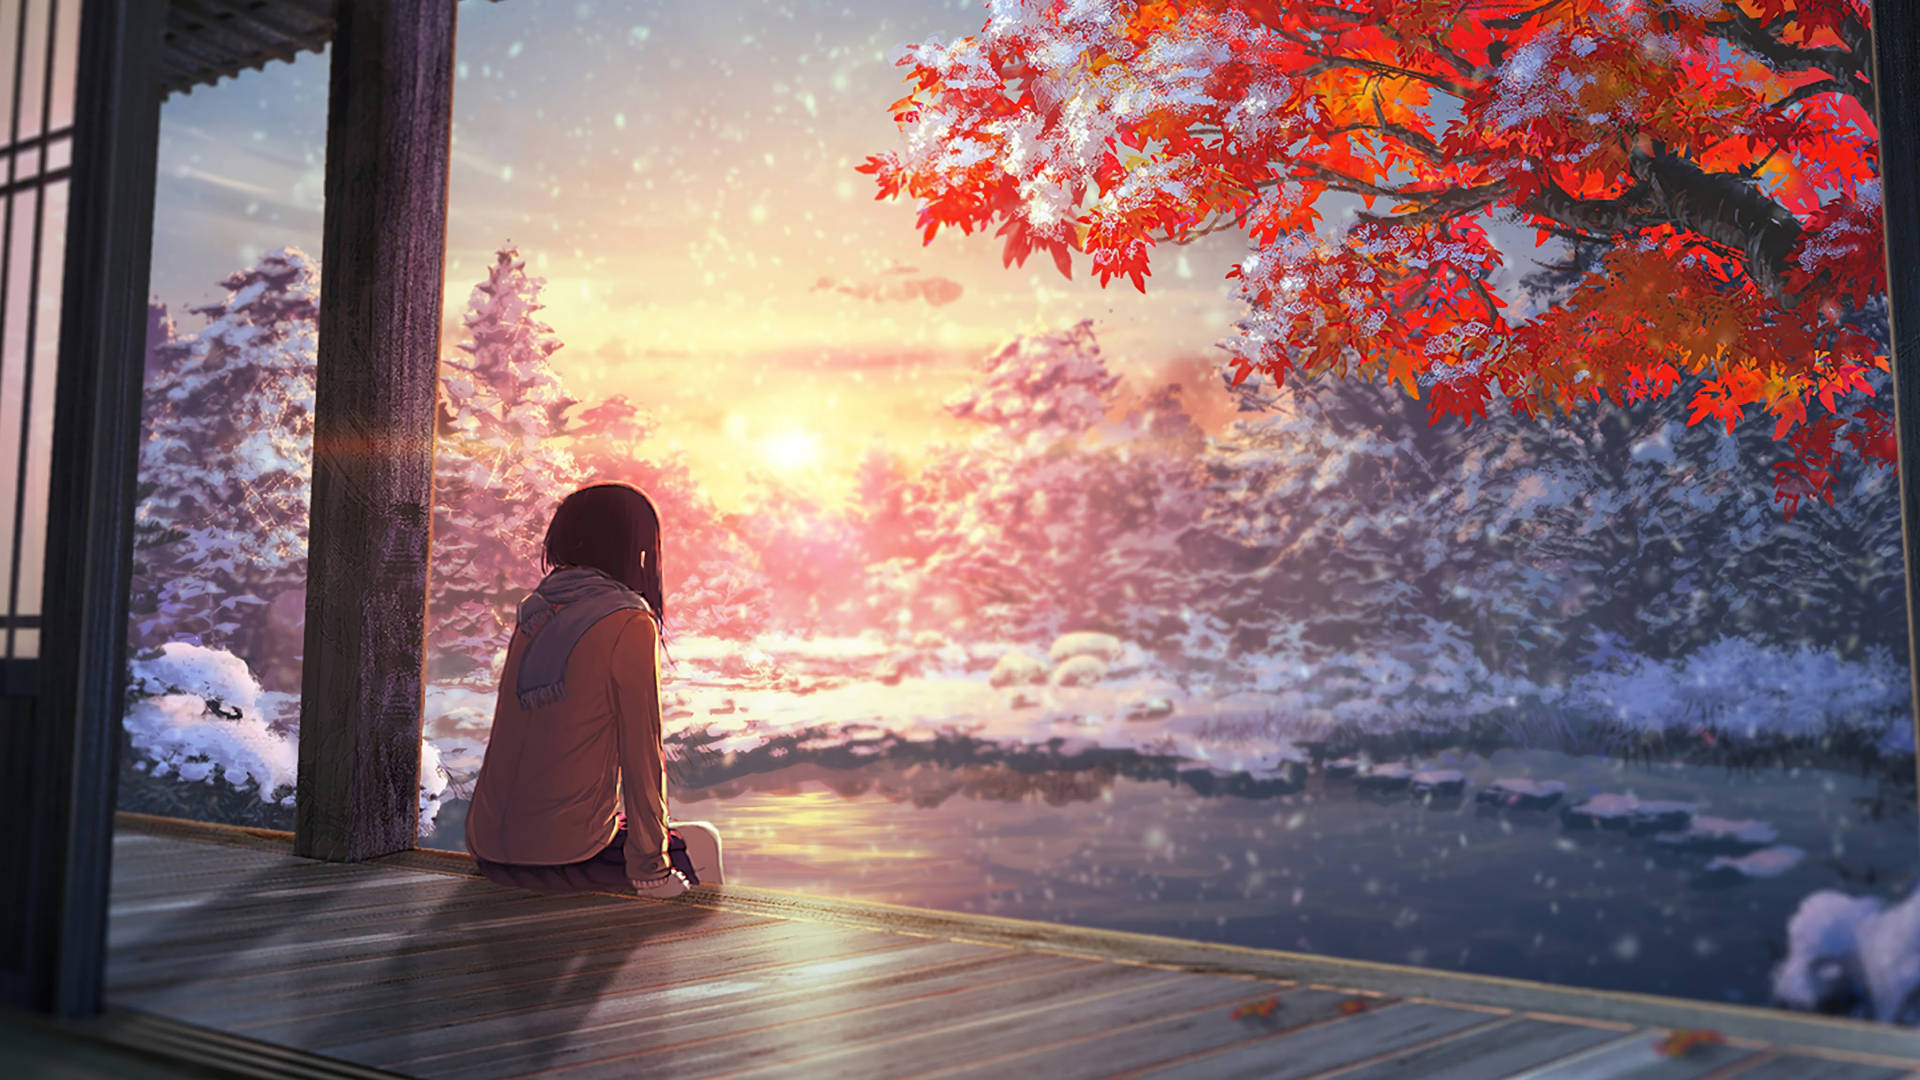 60 Anime Sunset Wallpapers  Download at WallpaperBro  Anime scenery  Anime scenery wallpaper World wallpaper